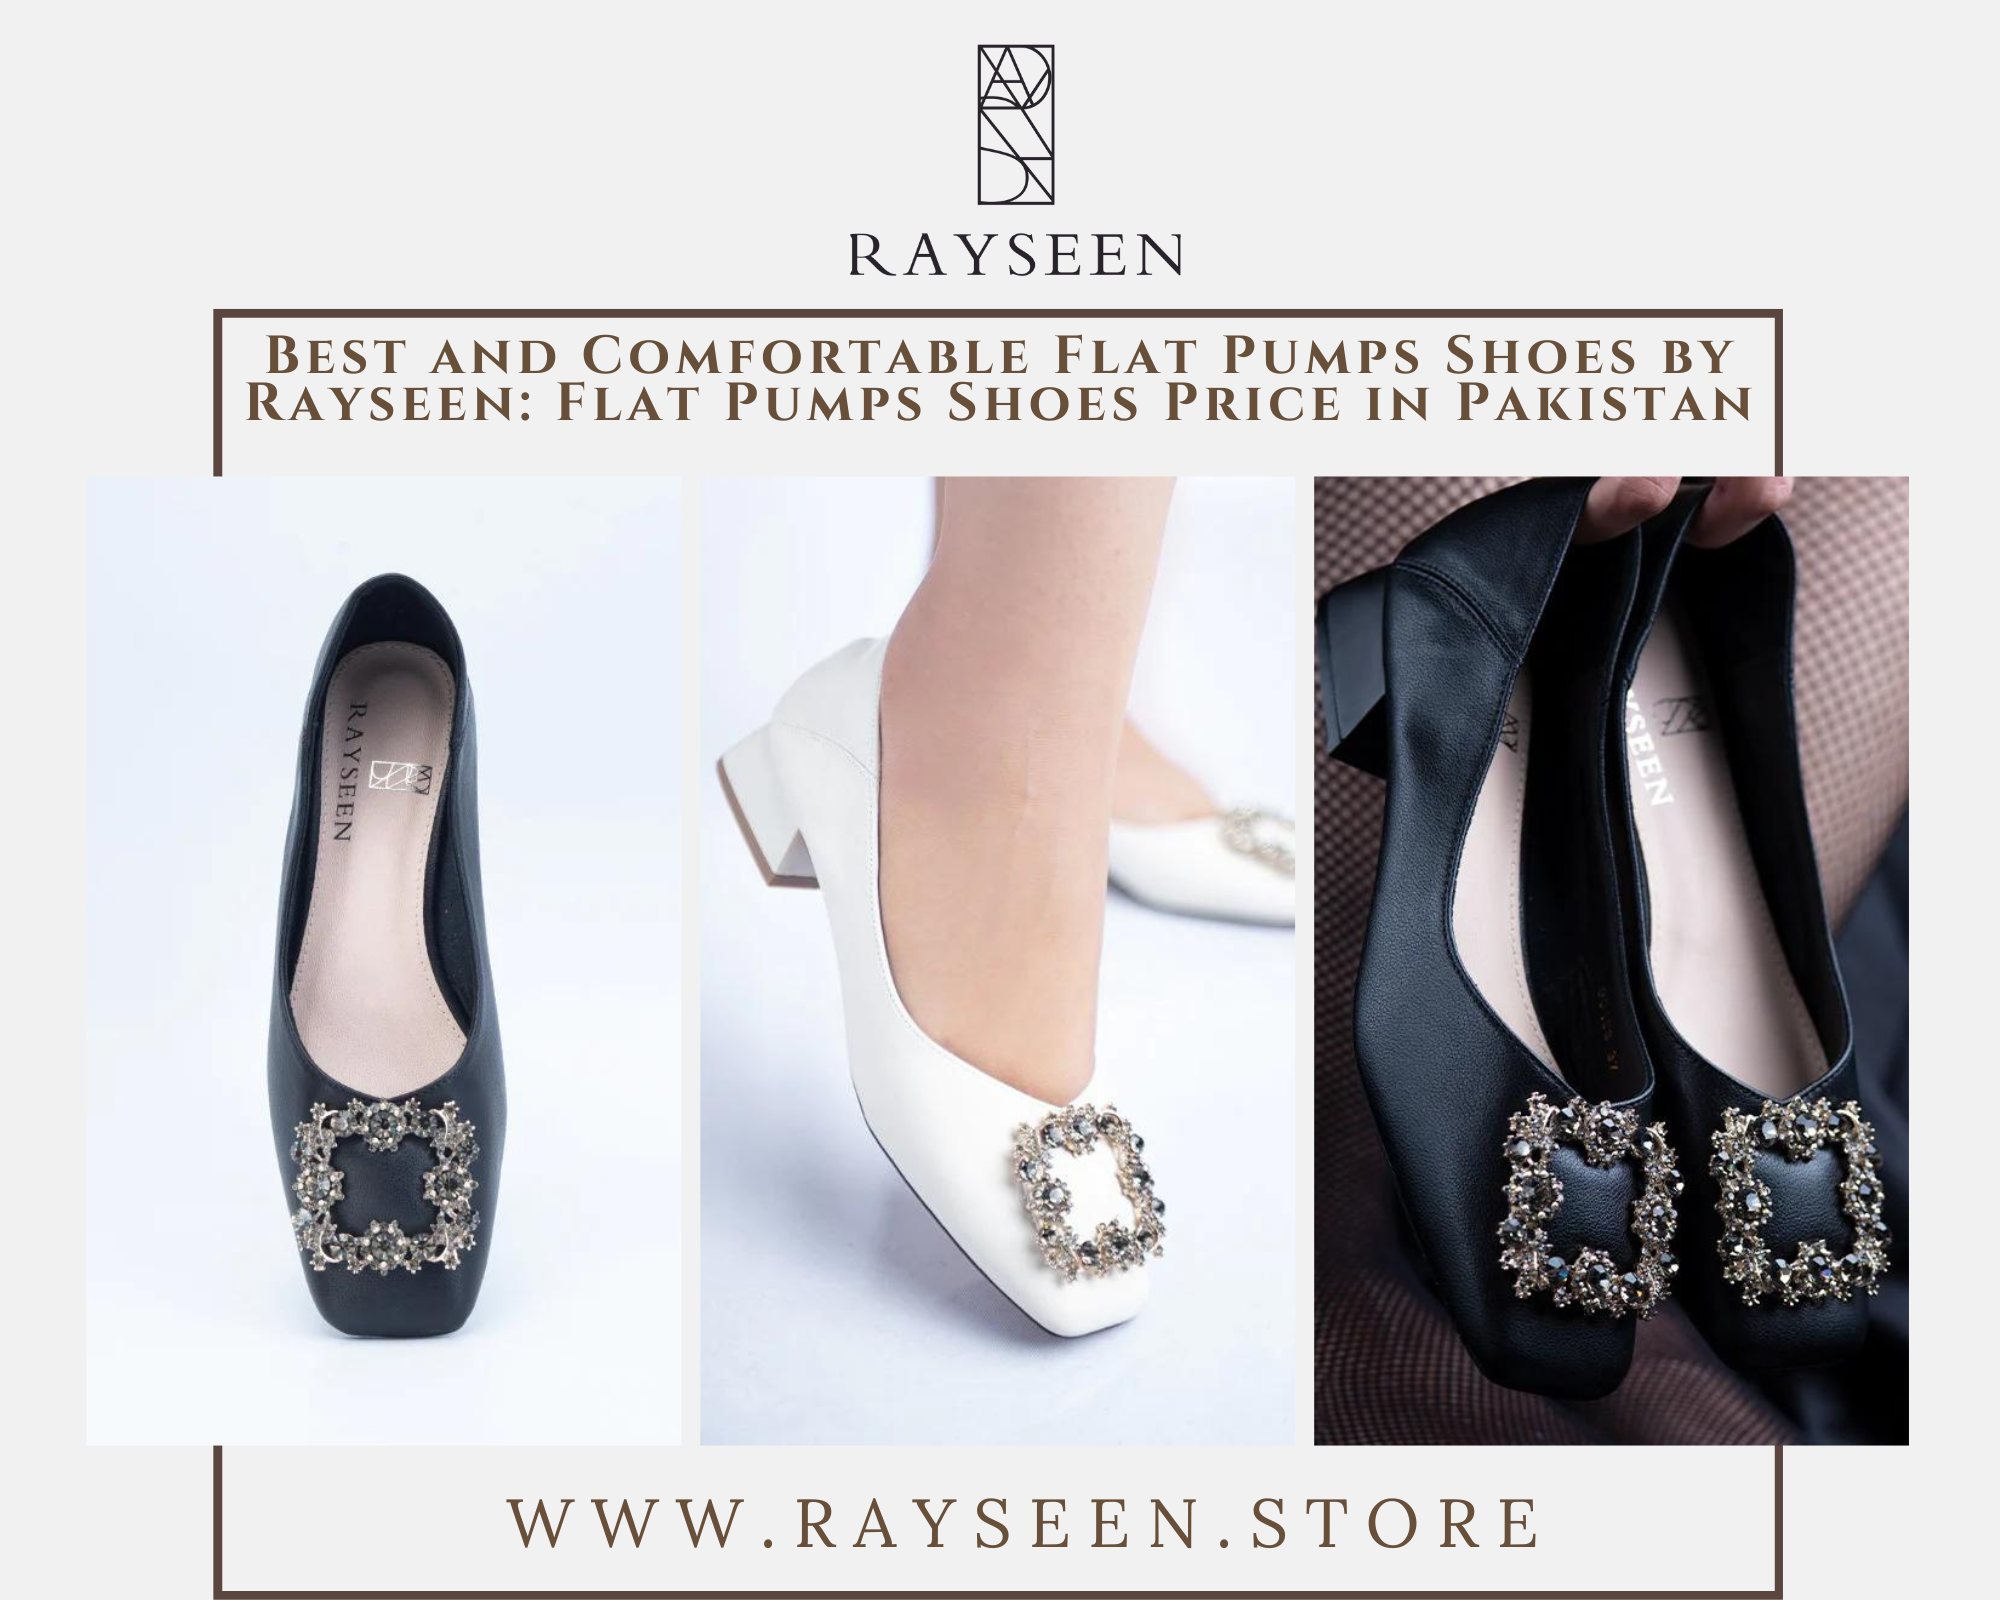 Best and Comfortable Flat Pumps Shoes by Rayseen Flat Pumps Shoes Price in Pakistan